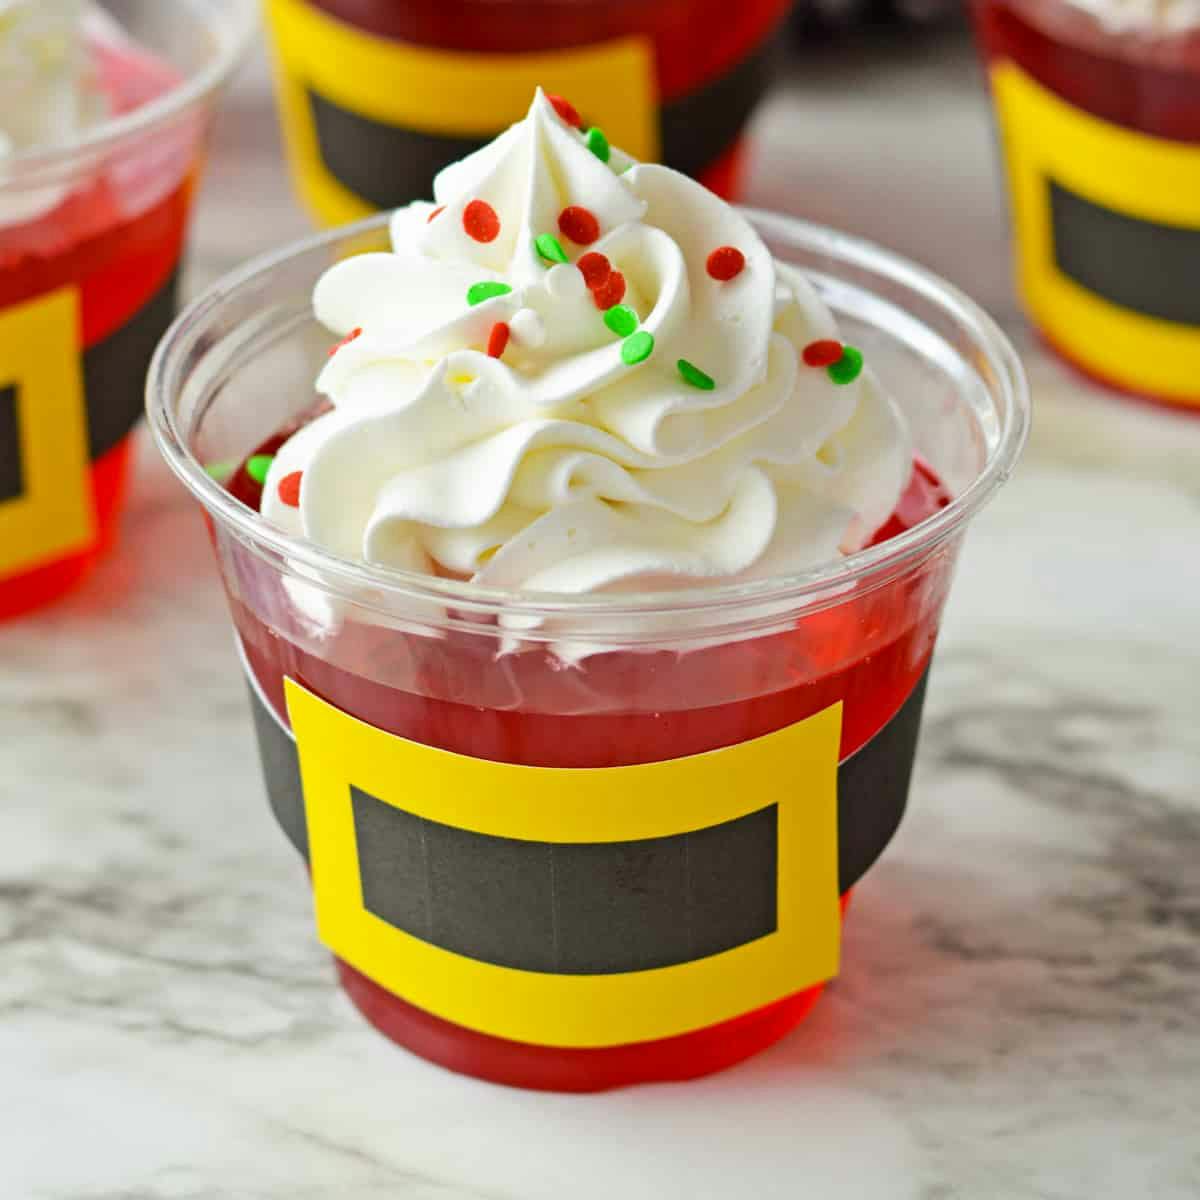 Jello cups topped with whipped cream and decorated to look like santa.